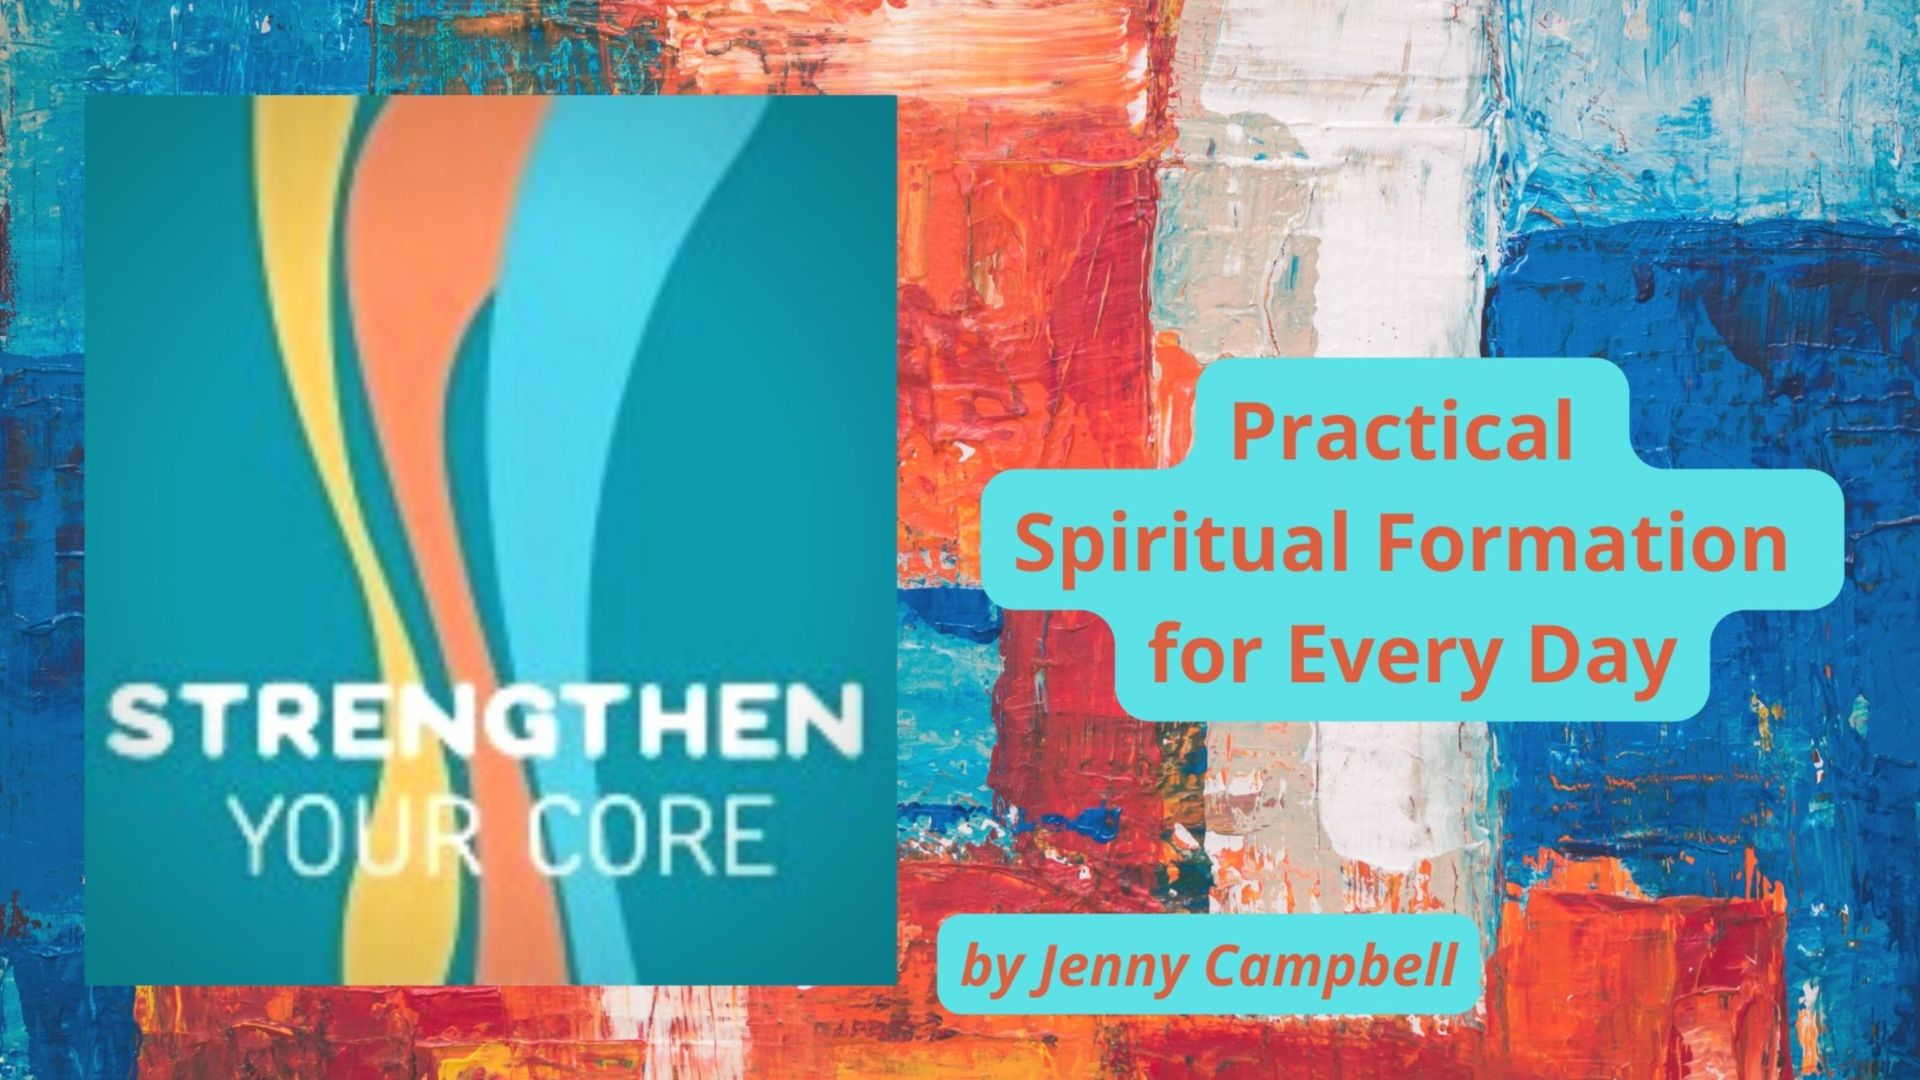 Author Jenny Campbell talks about her book 'Strengthen Your Core'